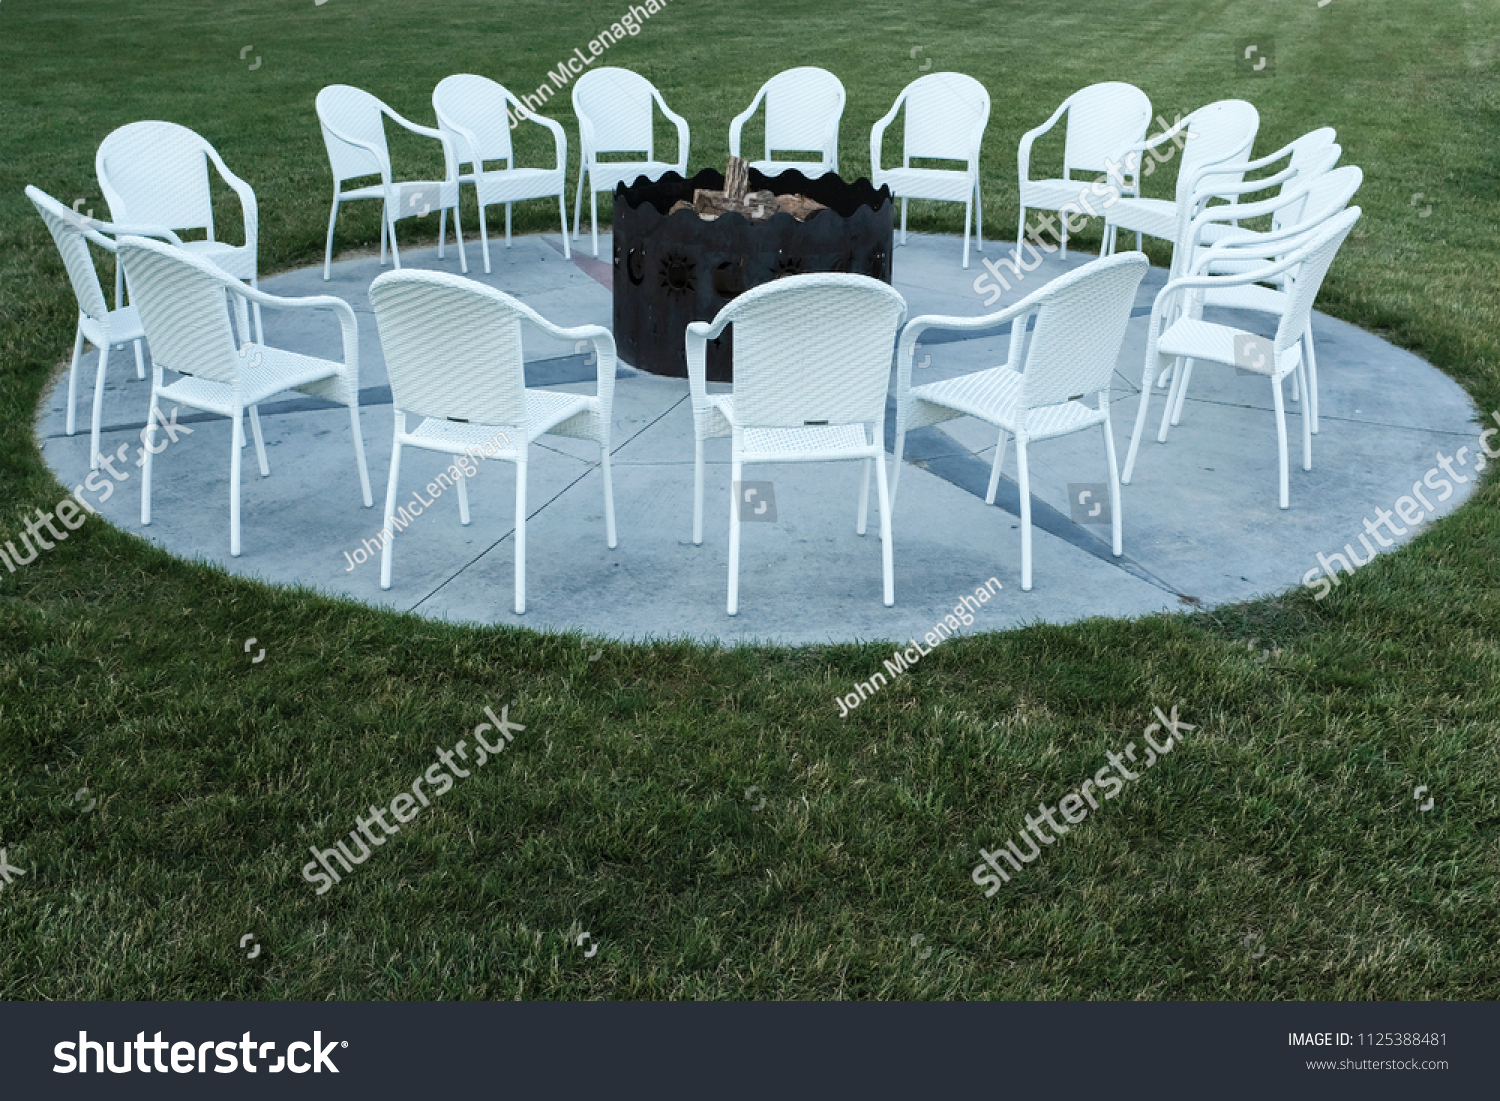 Fire Pit With A Cirlce Of Chairs For Vacation #1125388481